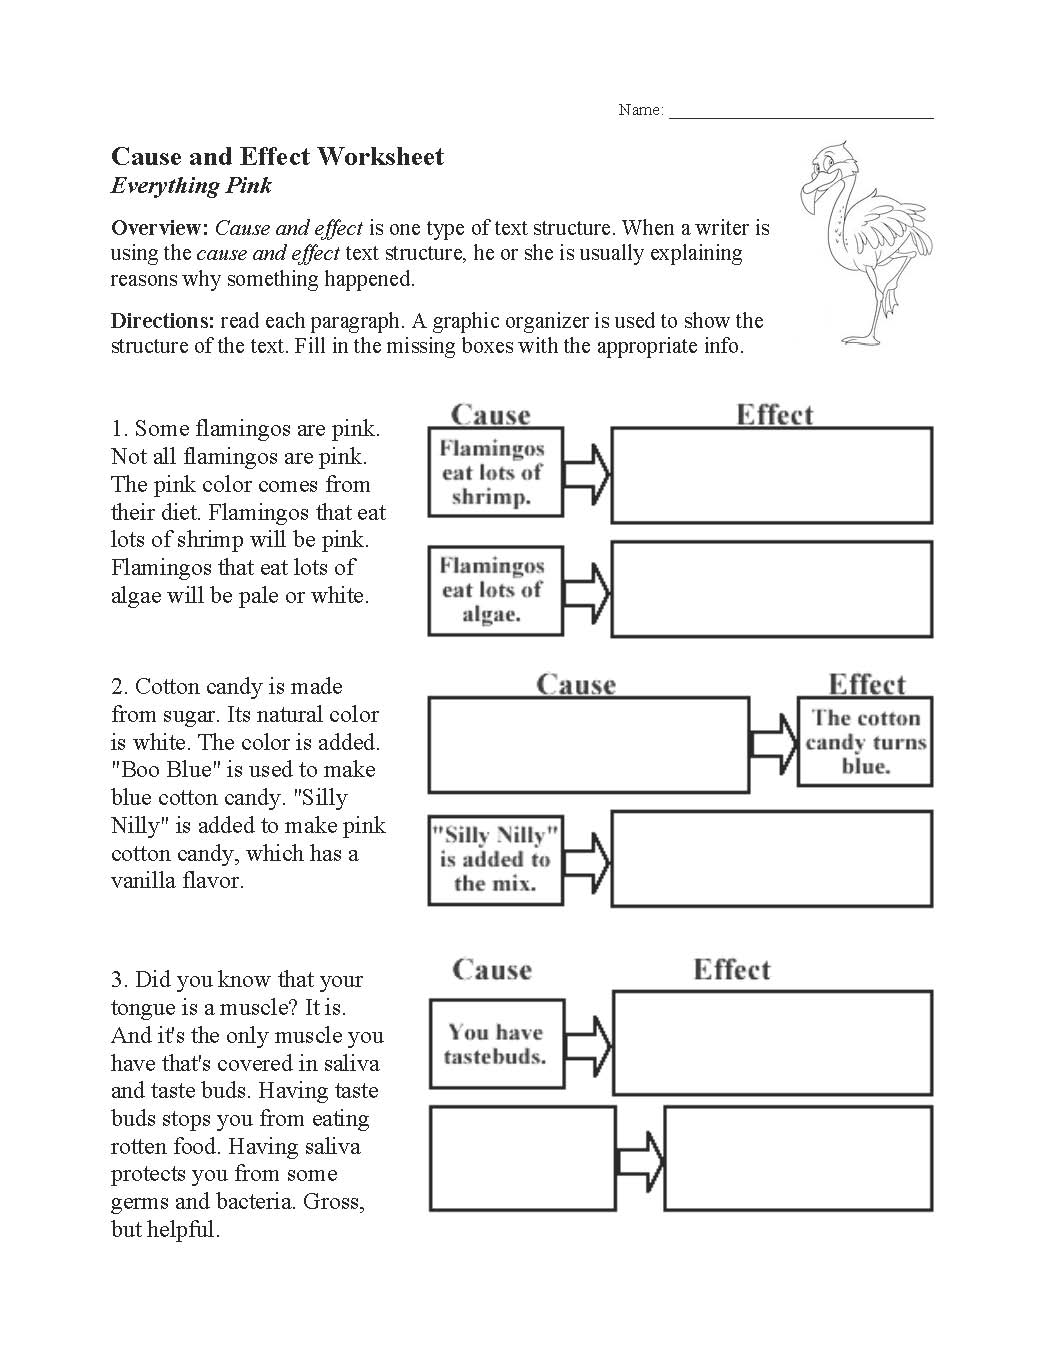 This is a preview image of our Cause and Effect Worksheet. Click on it to enlarge or view the source file.